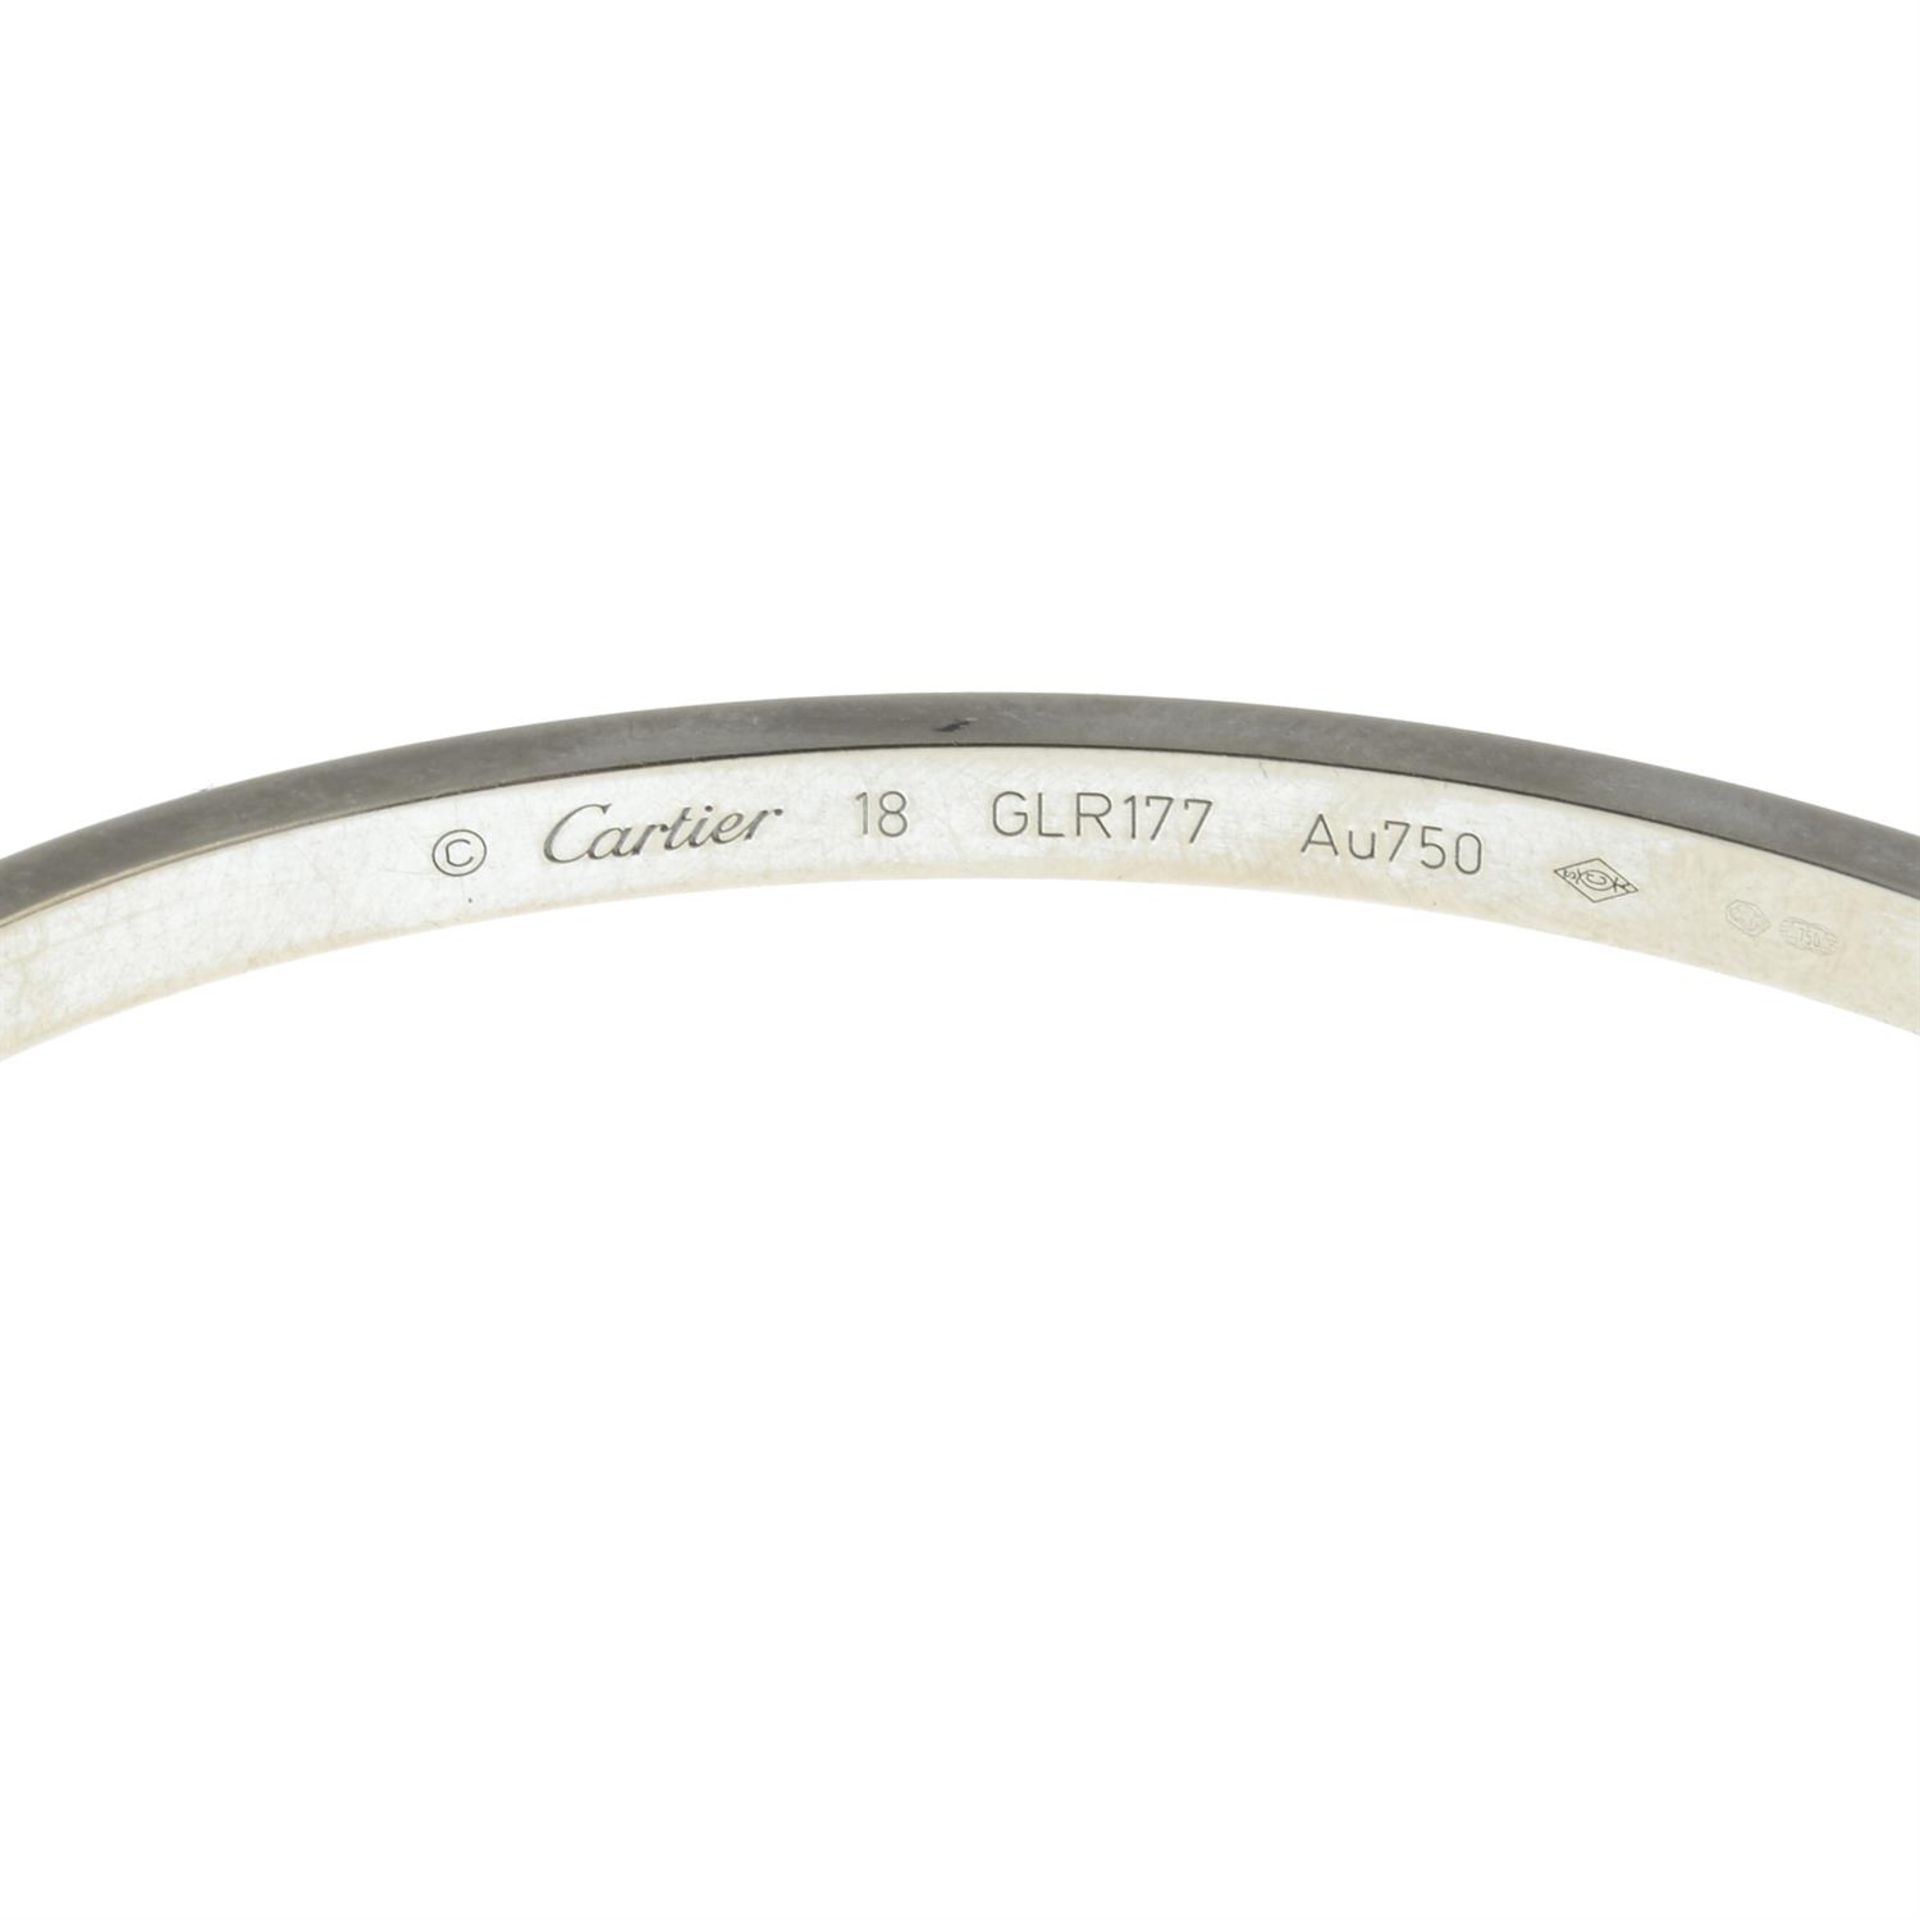 A 'Love' bangle, by Cartier. - Image 3 of 3